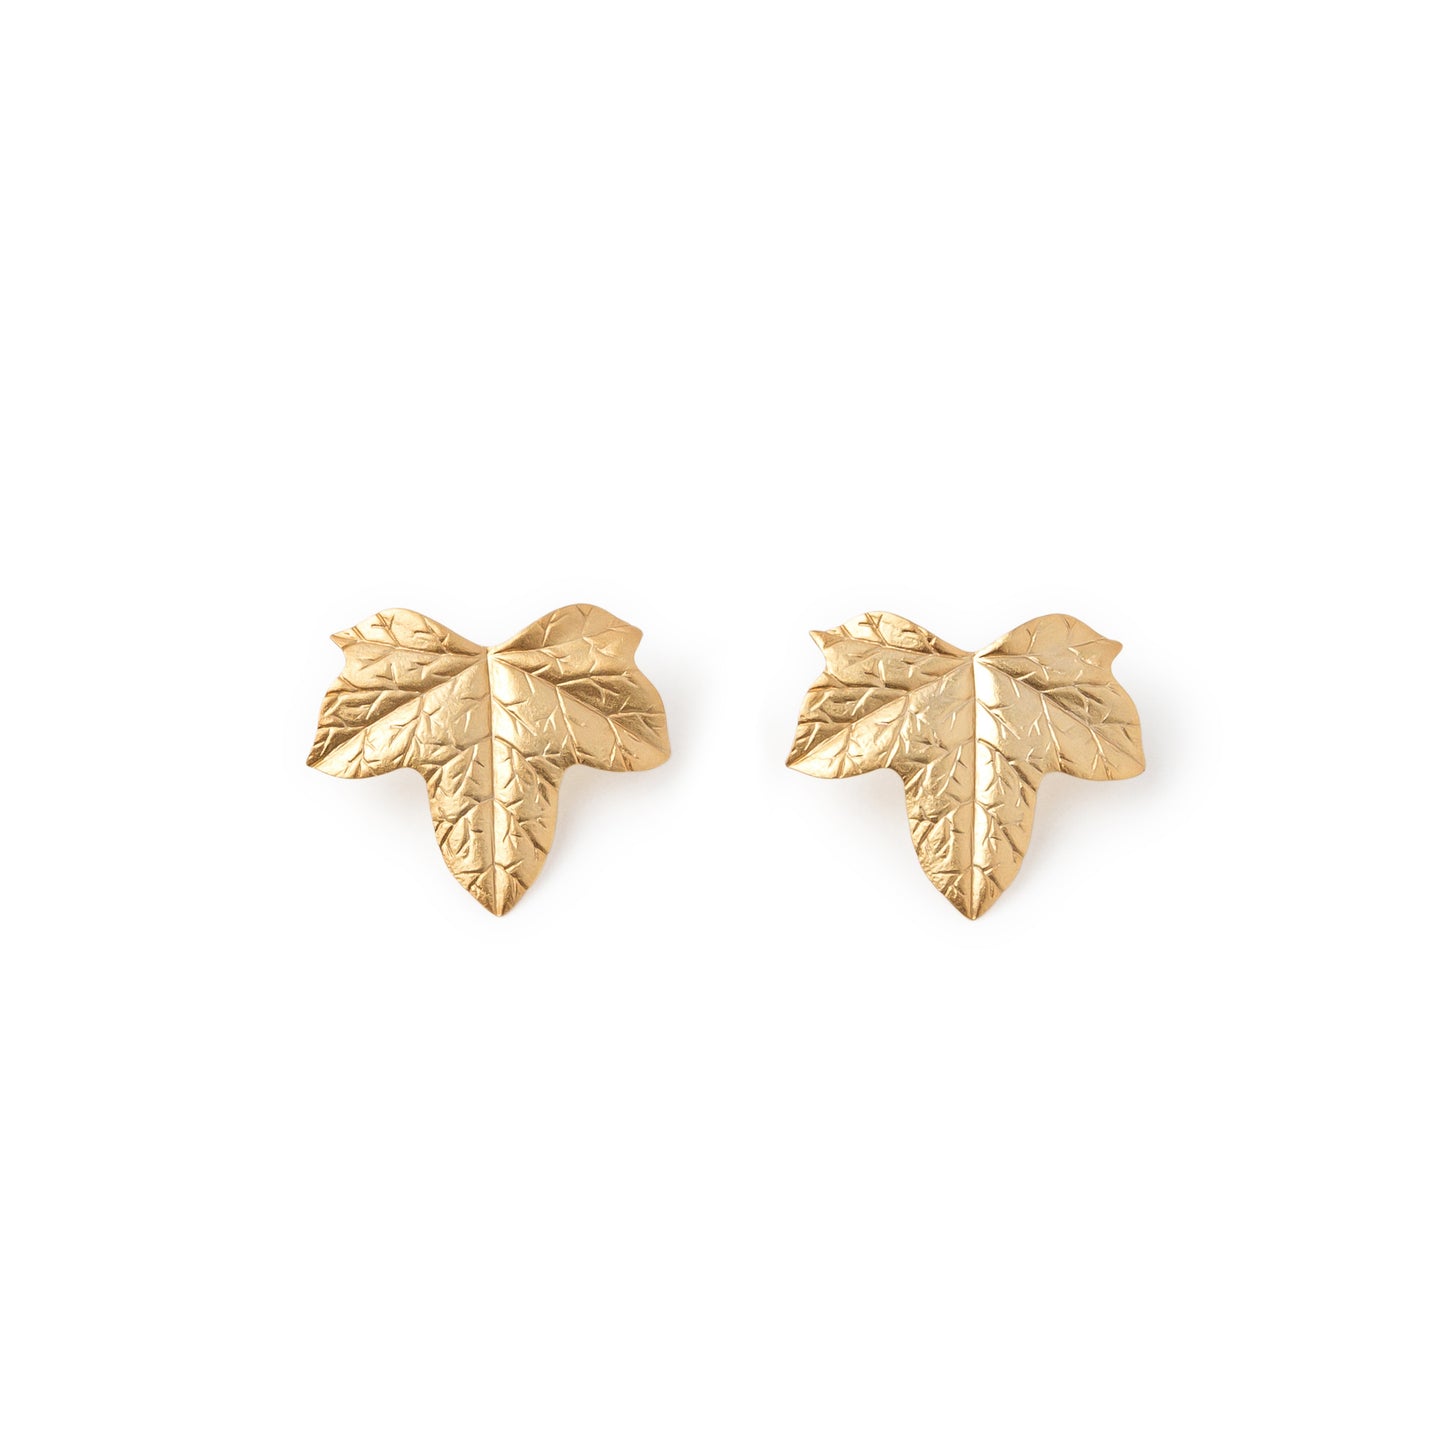 Medium 24ct gold plated Ivy earrings